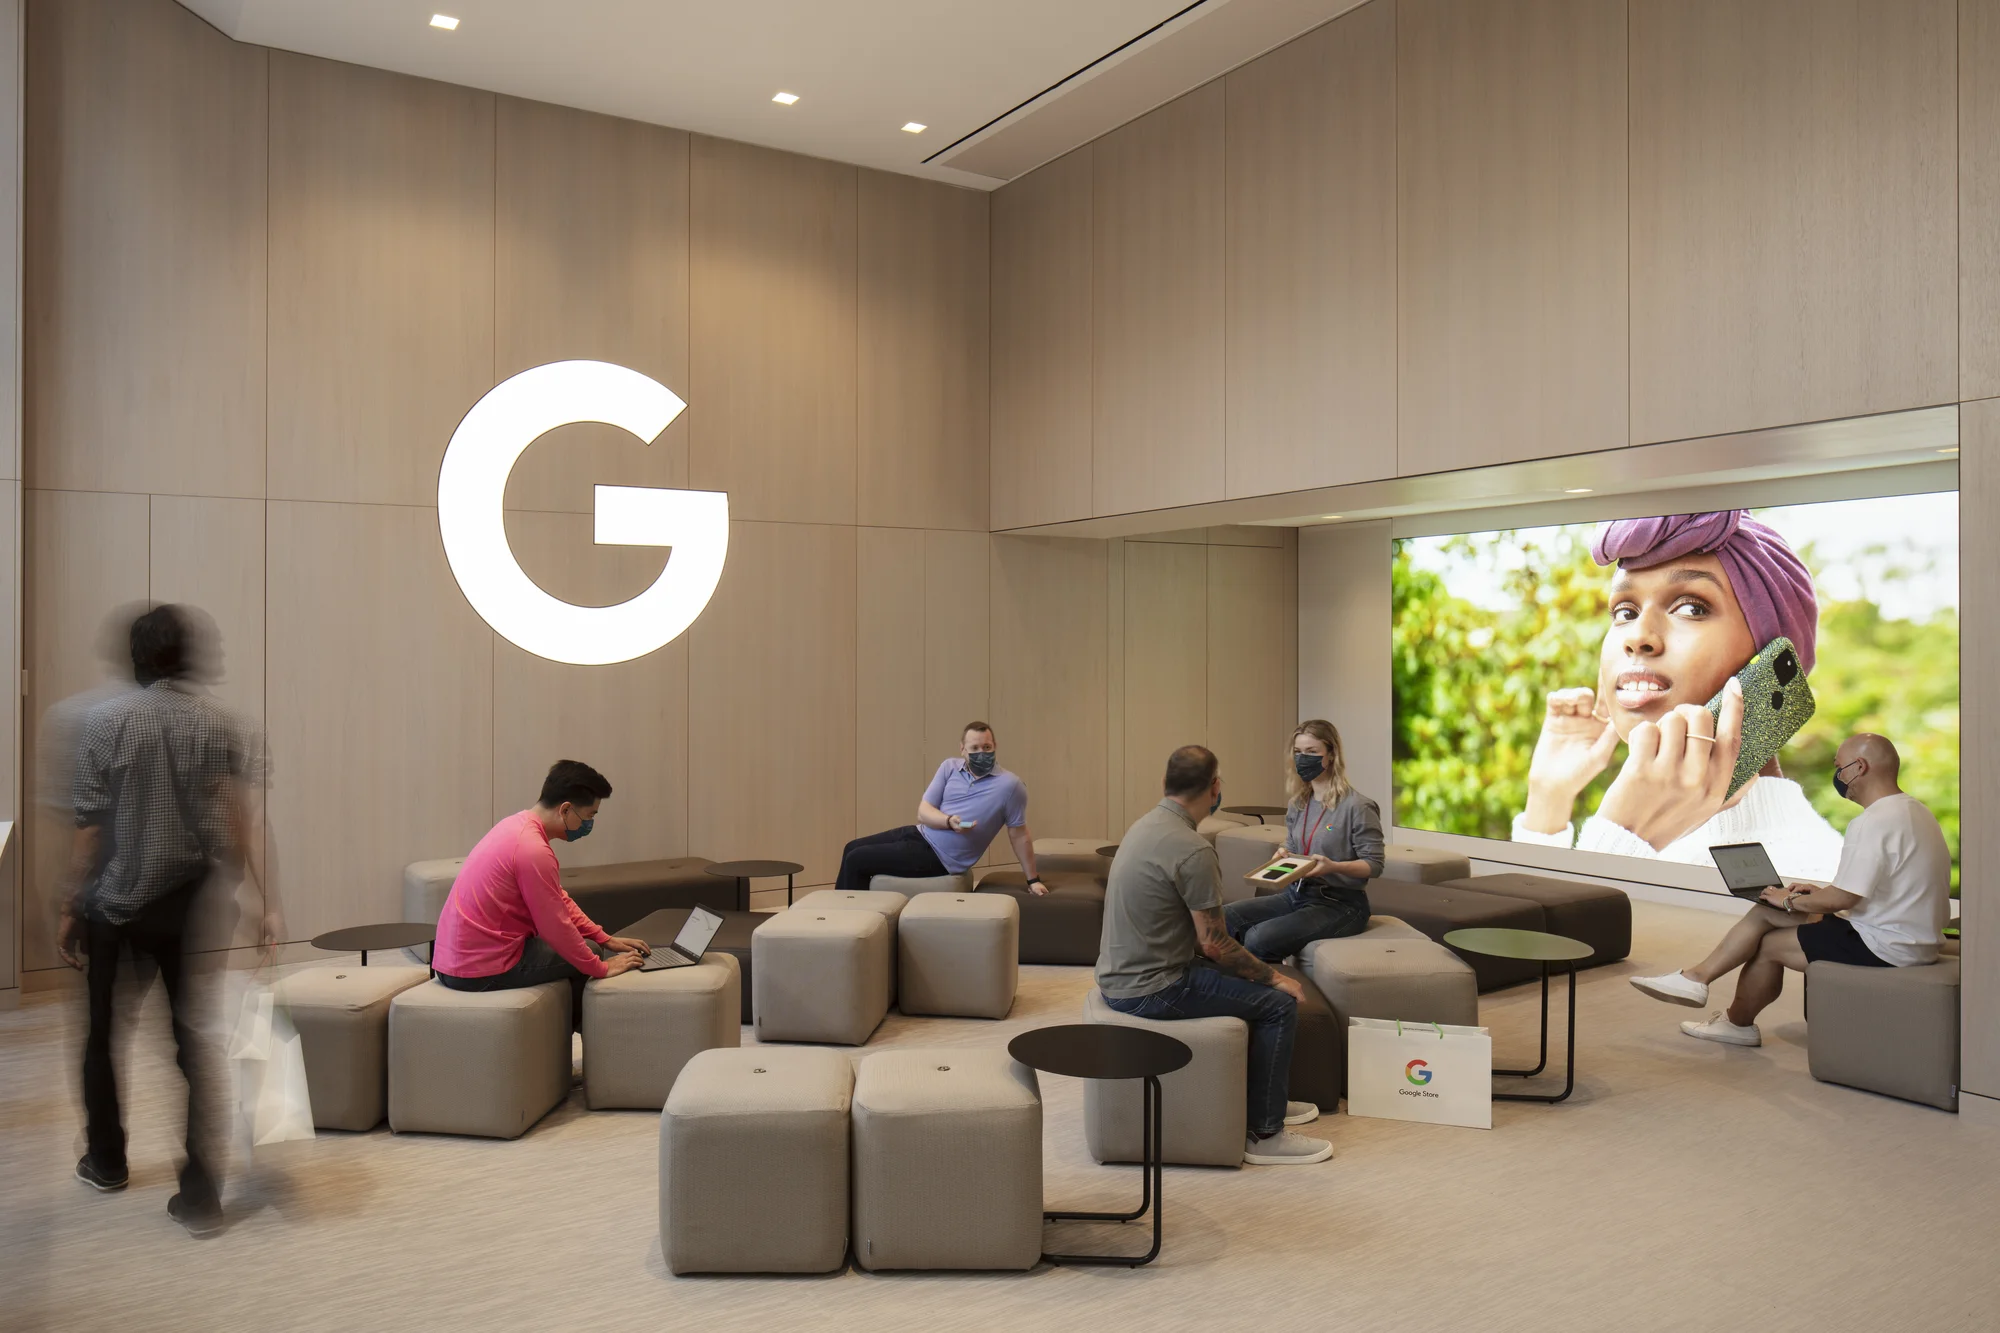 Six people stand and sit in a large meeting space containing a big screen and a Google ‘G’.